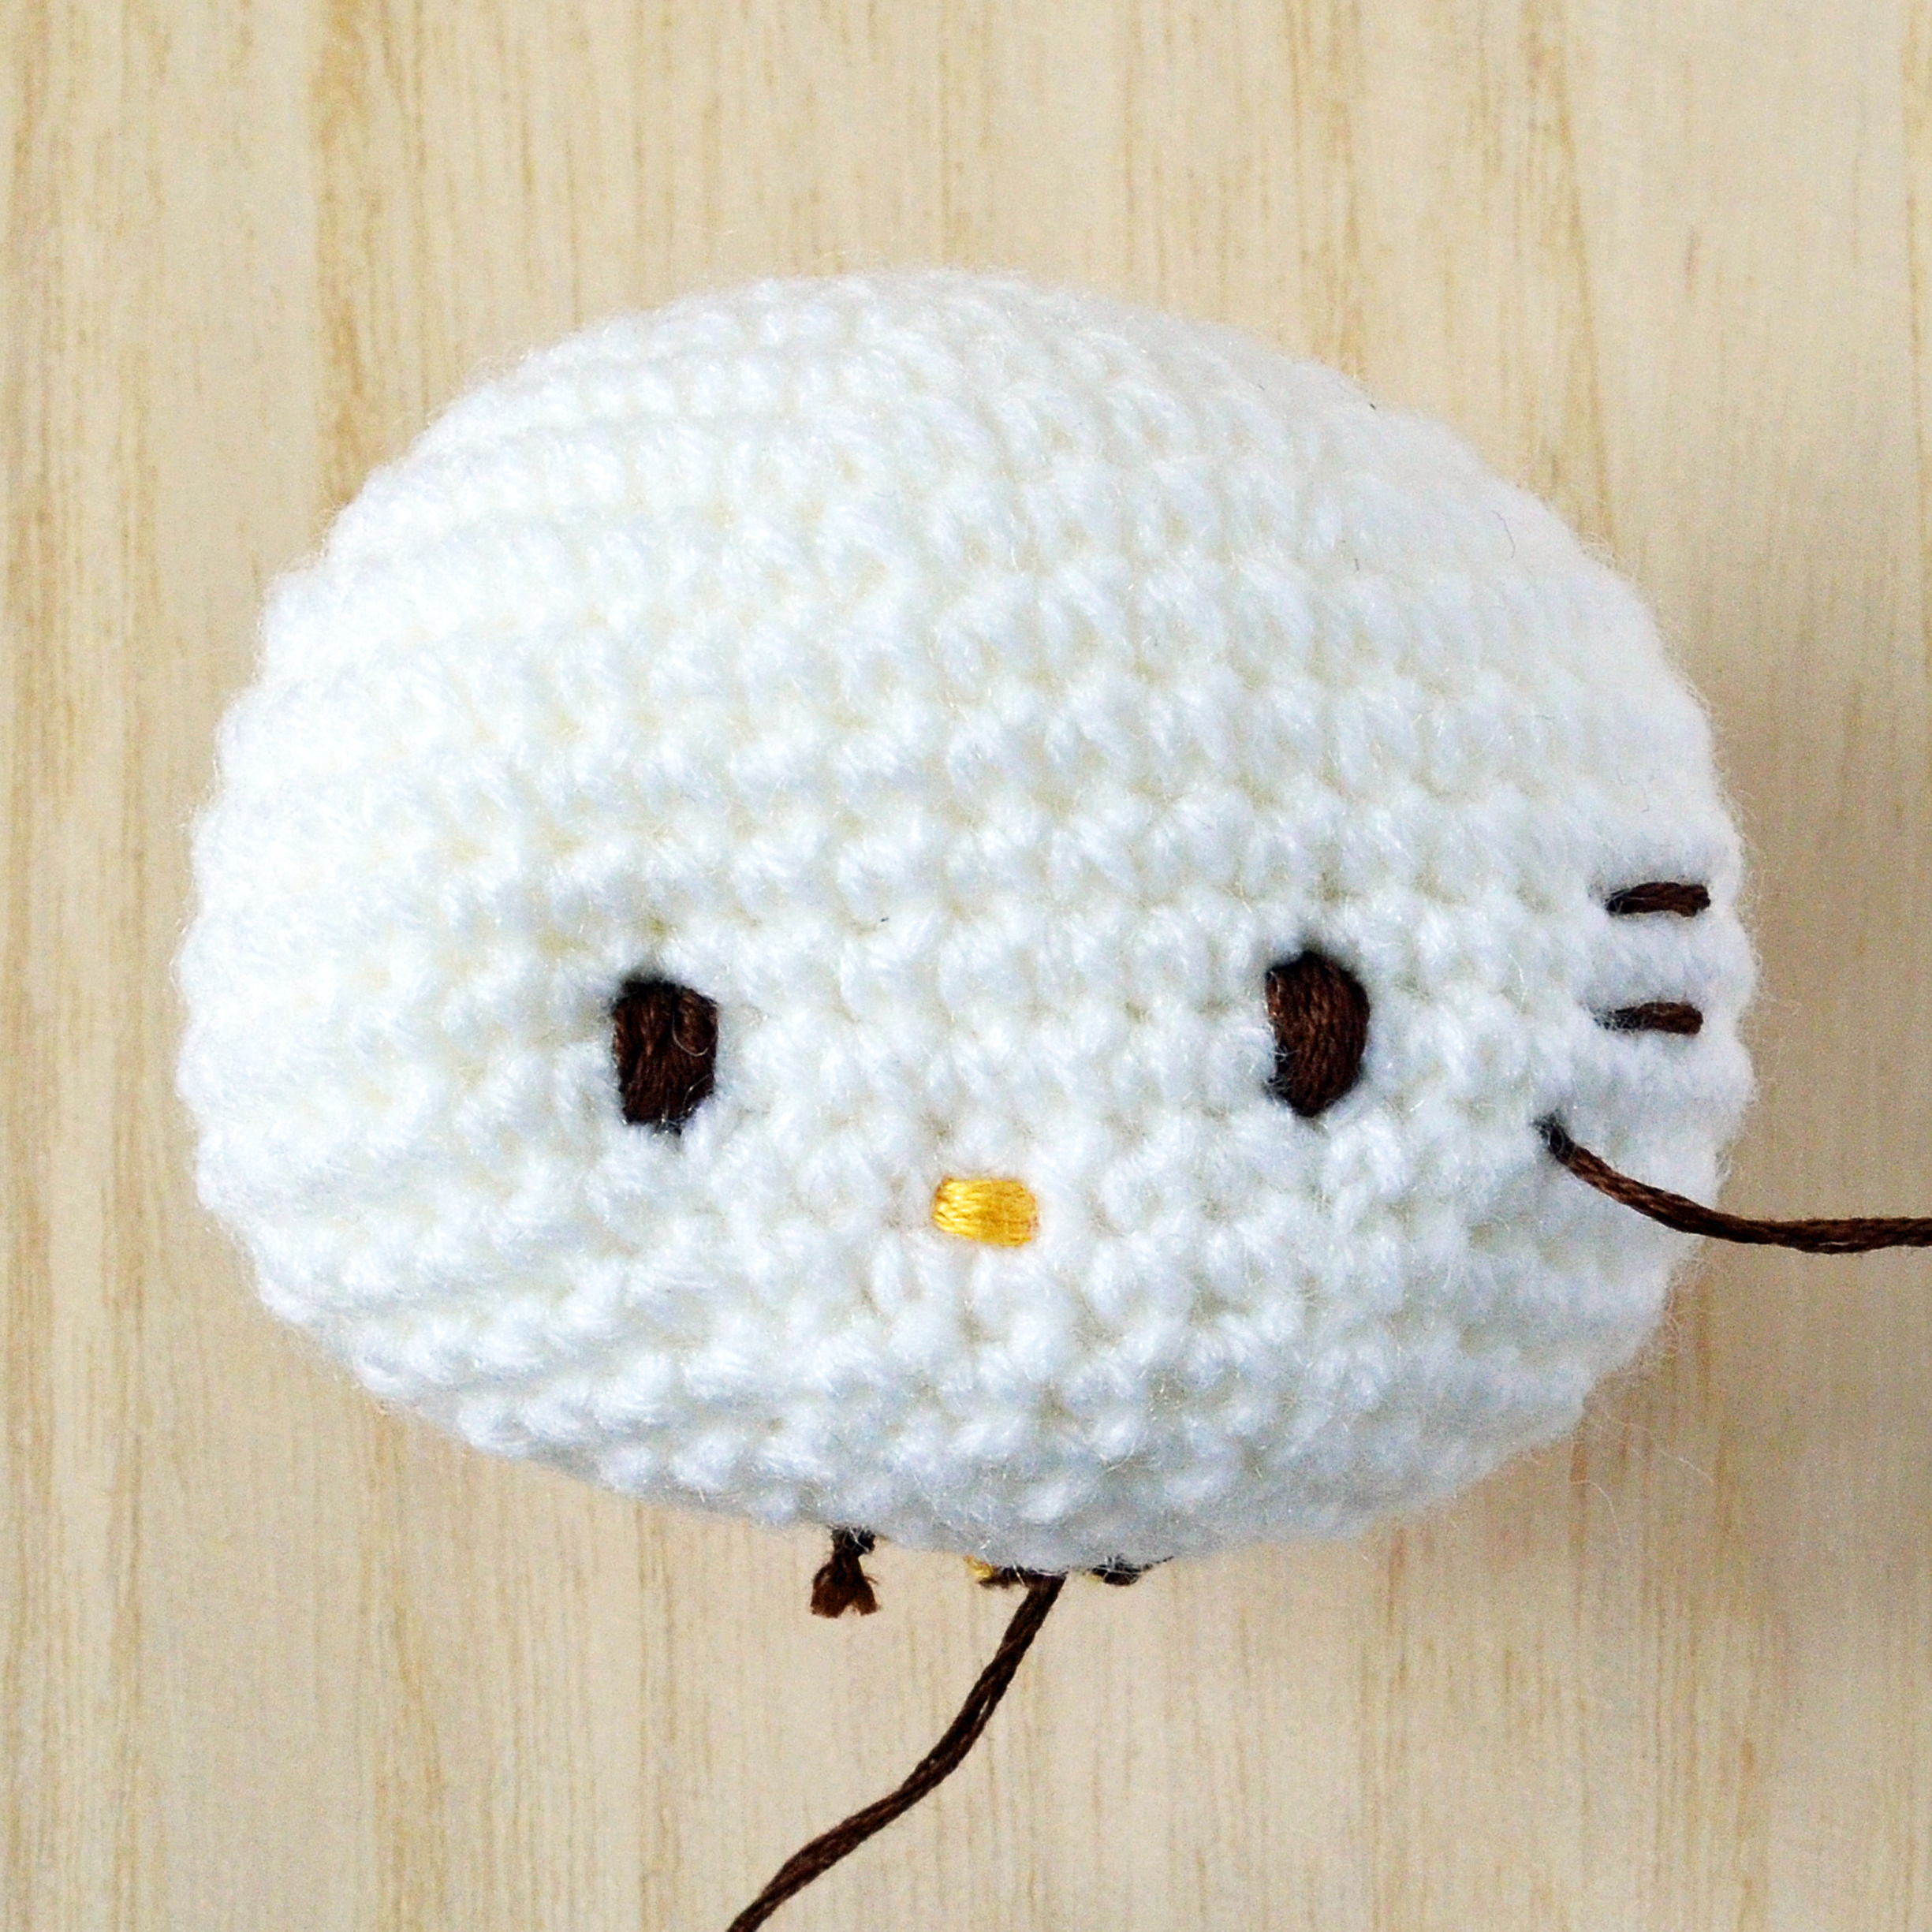 Hello Kitty Crochet Pattern Amigurumi Exclusive Hello Kitty Crochet Tip2 Its In The Eyes Nose And